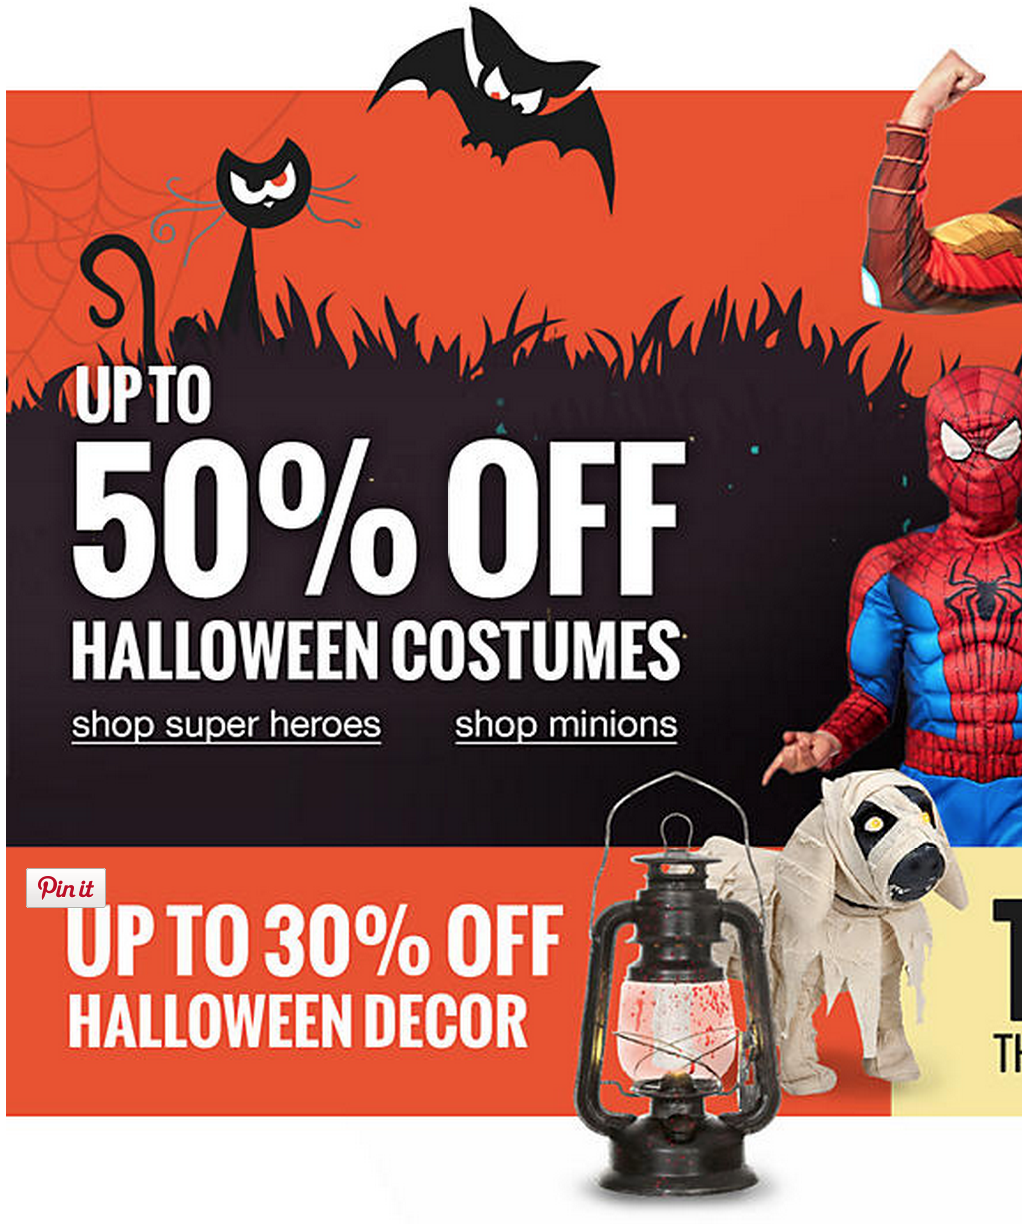 $5 Off Halloween Costumes & Decor $40 or More - Includes Sales Items!